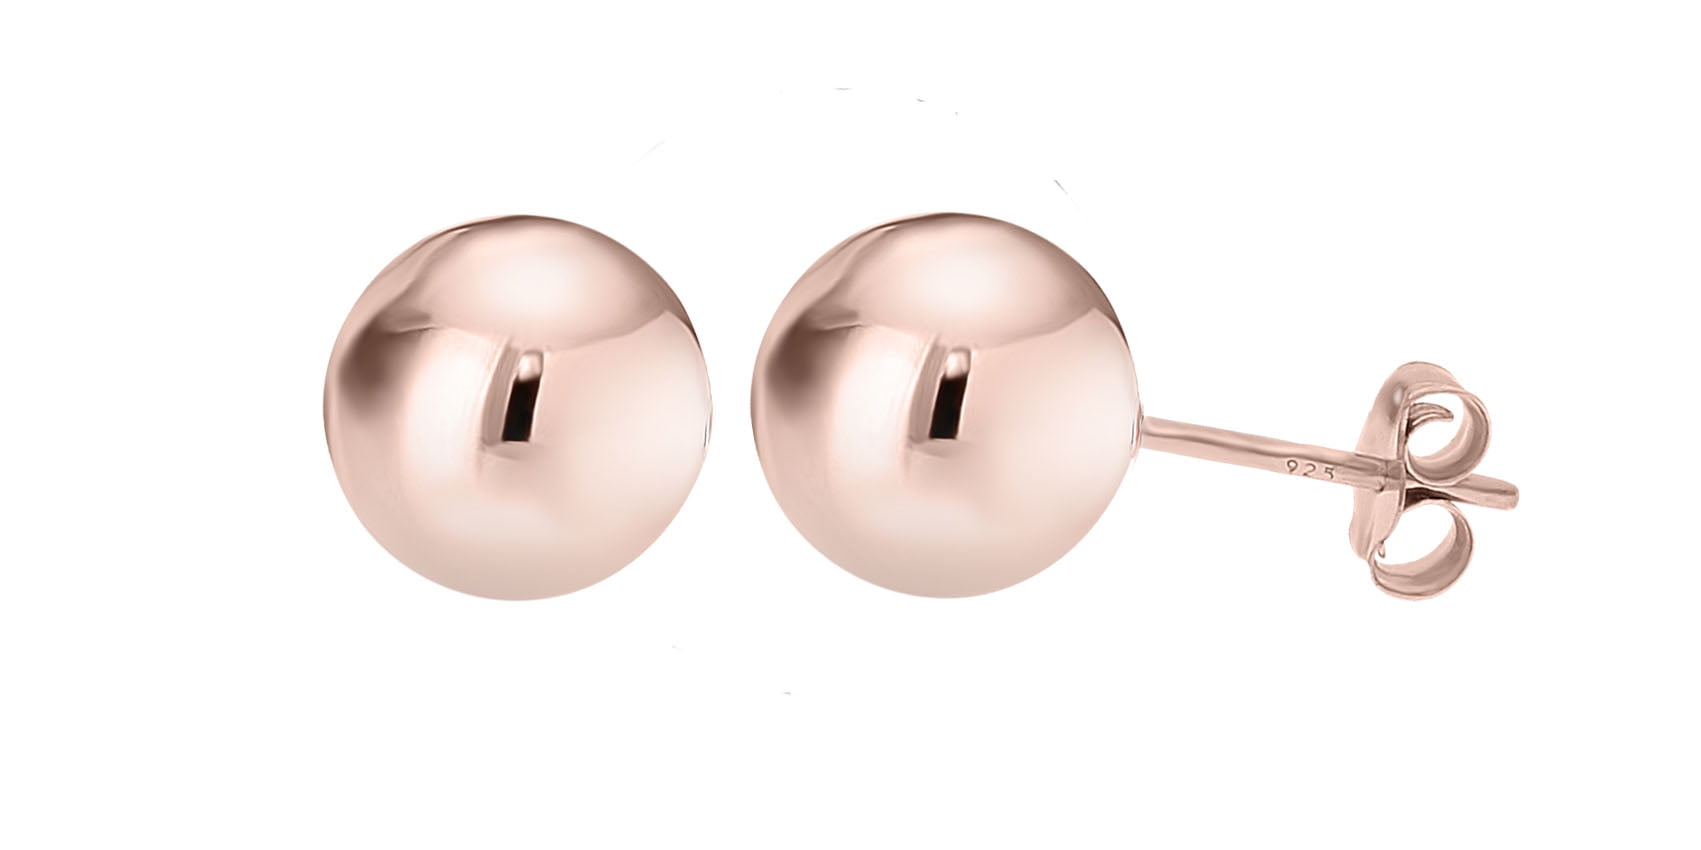 8mm Sterling Silver Ball Stud Earrings in 4mm 12mm and 14mm in Silver 10mm Gold or Rose Gold 6mm